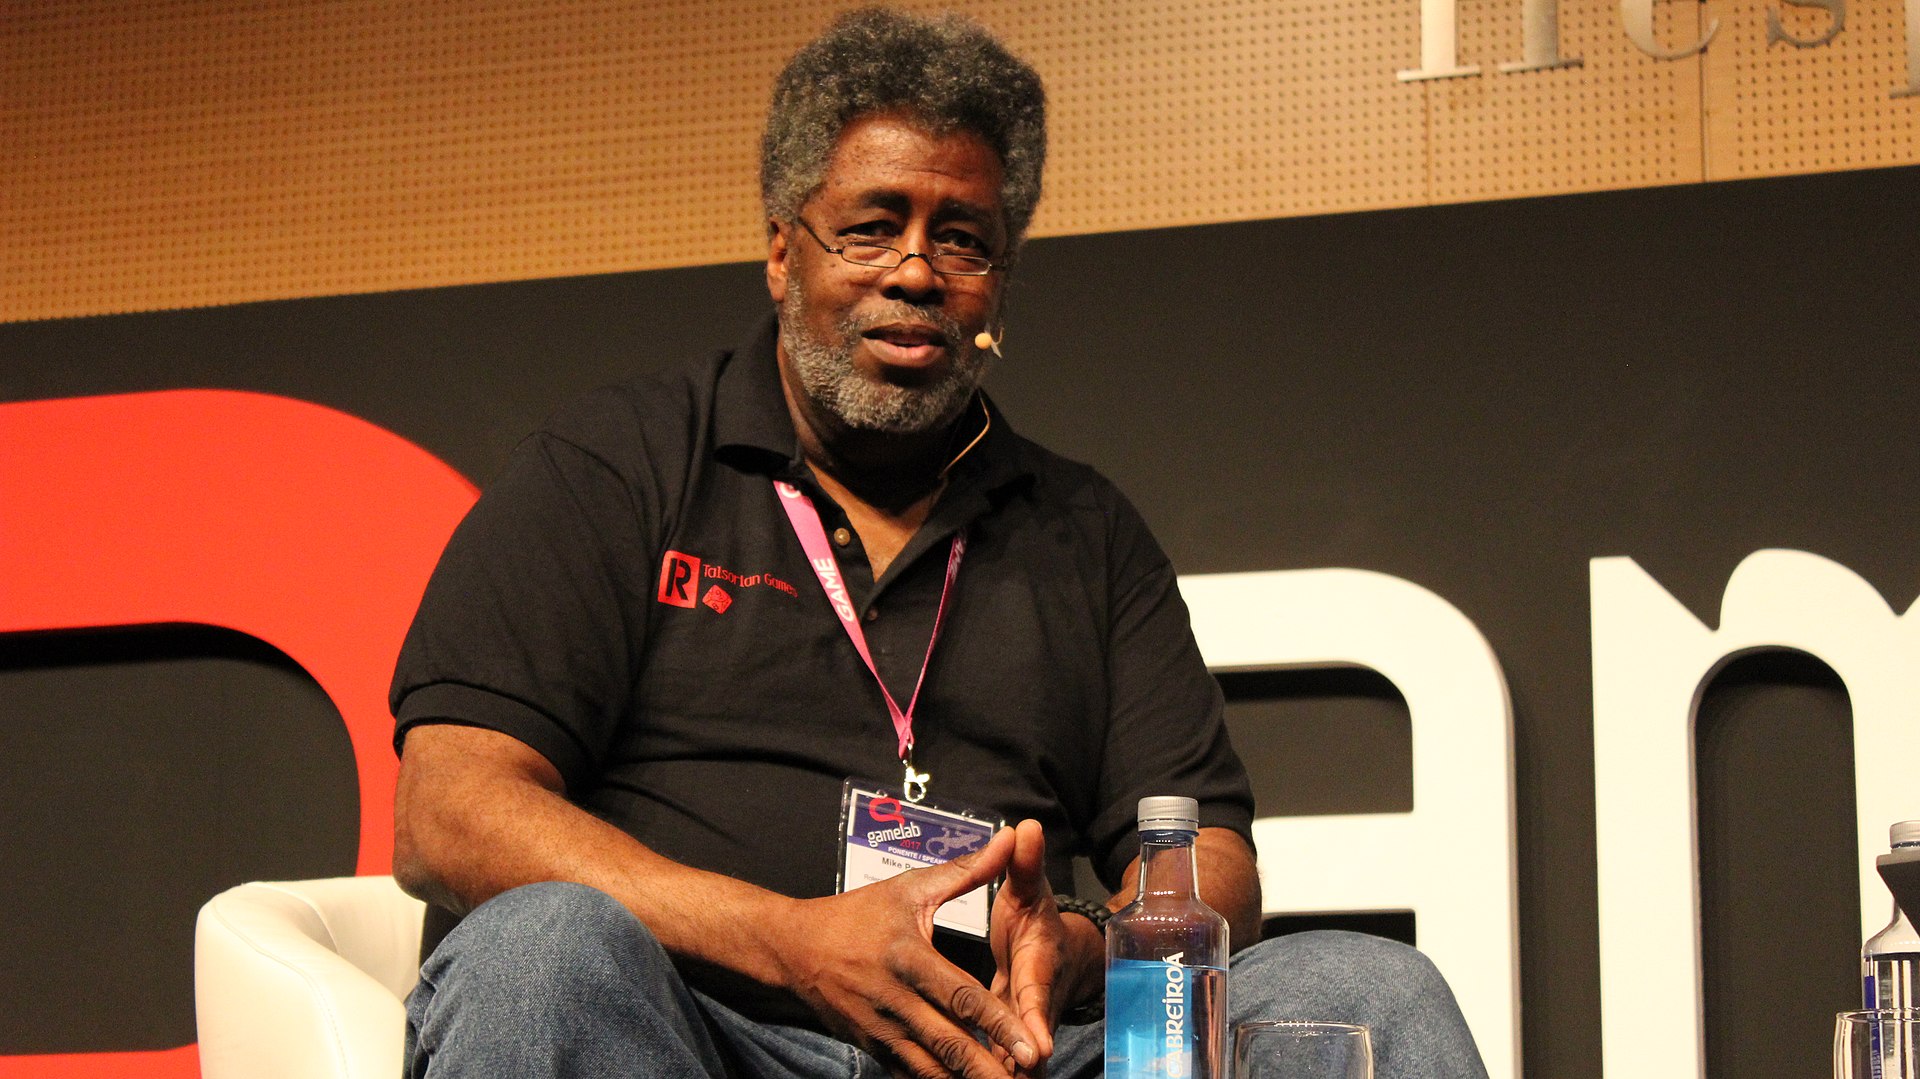  Cyberpunk creator Mike Pondsmith talks about the early days of making RPGs 